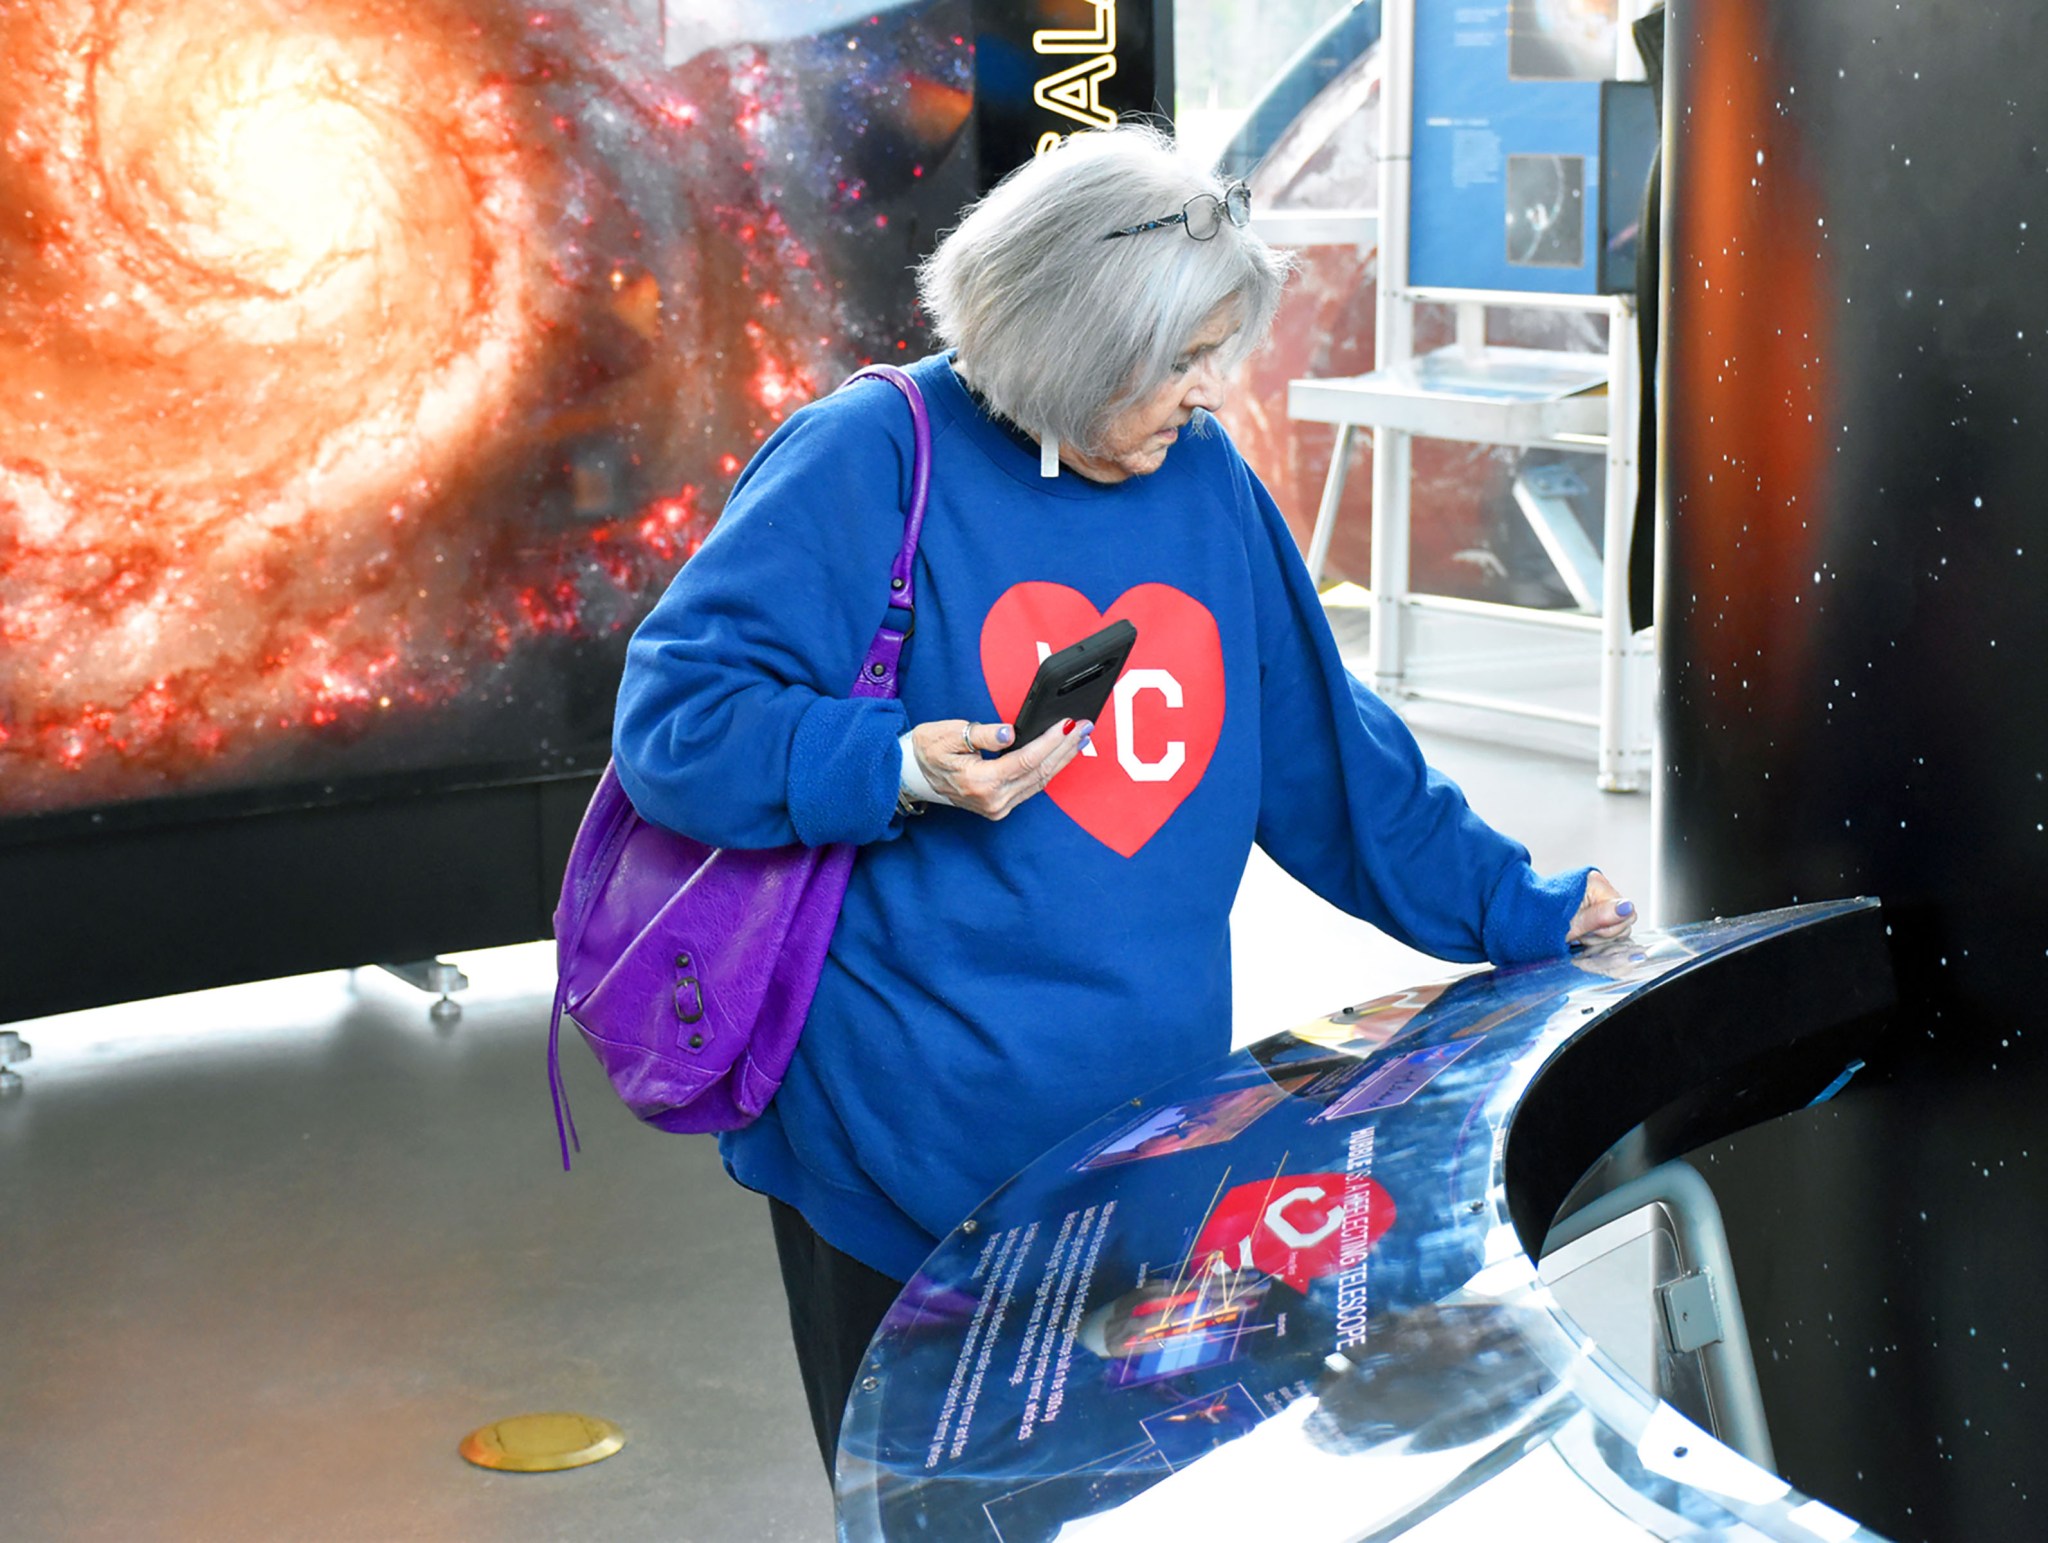 A guest stands in front of a kiosk in the Hubble Space Telescope travelling exhibit. A large image of a spiral galaxy is backlit behind her.